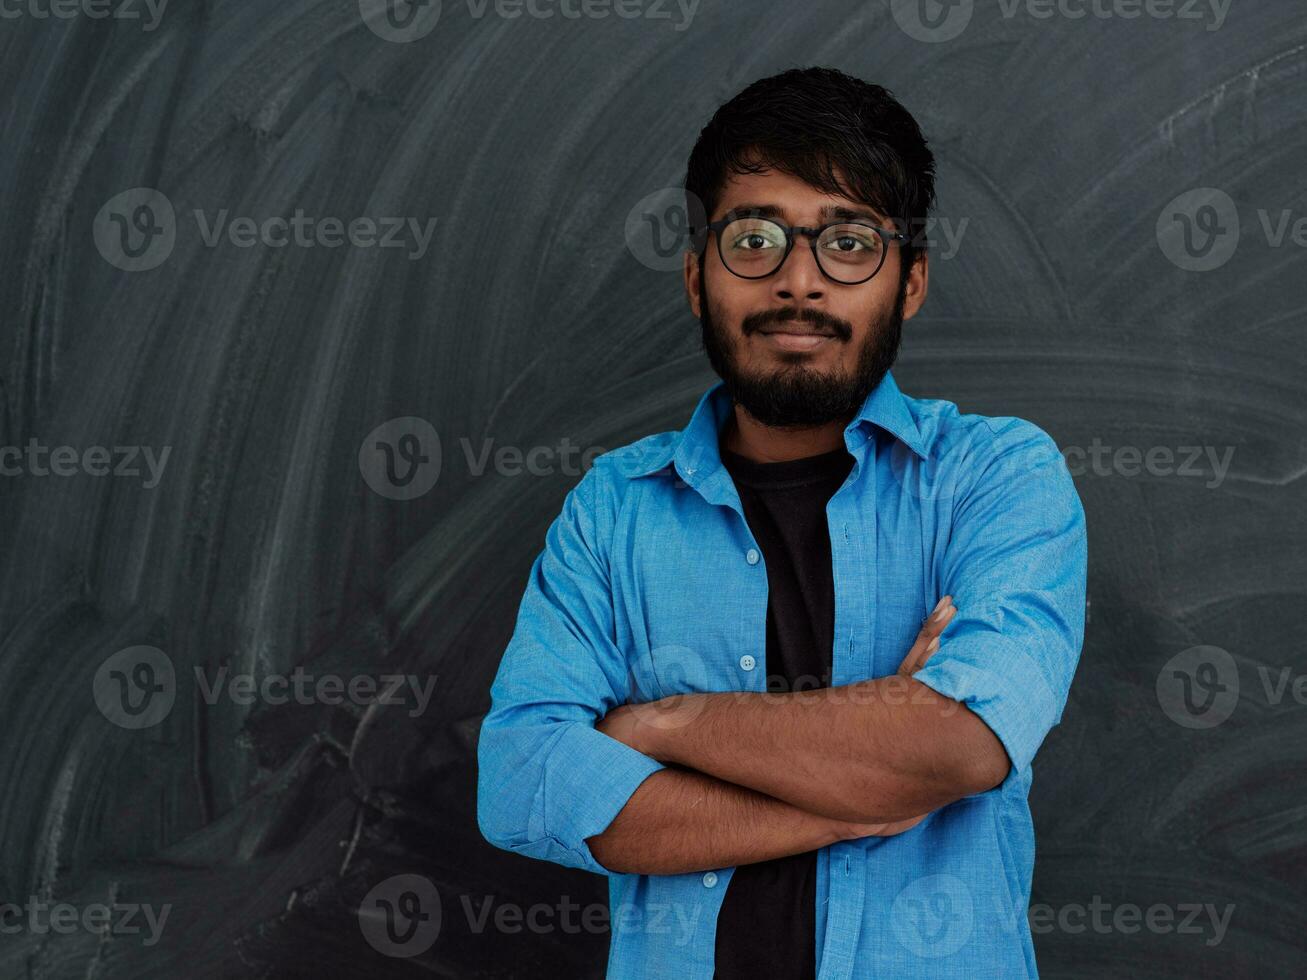 A young Indian student in a blue shirt with glasses posing with his arms crossed in front of the school blackboard photo